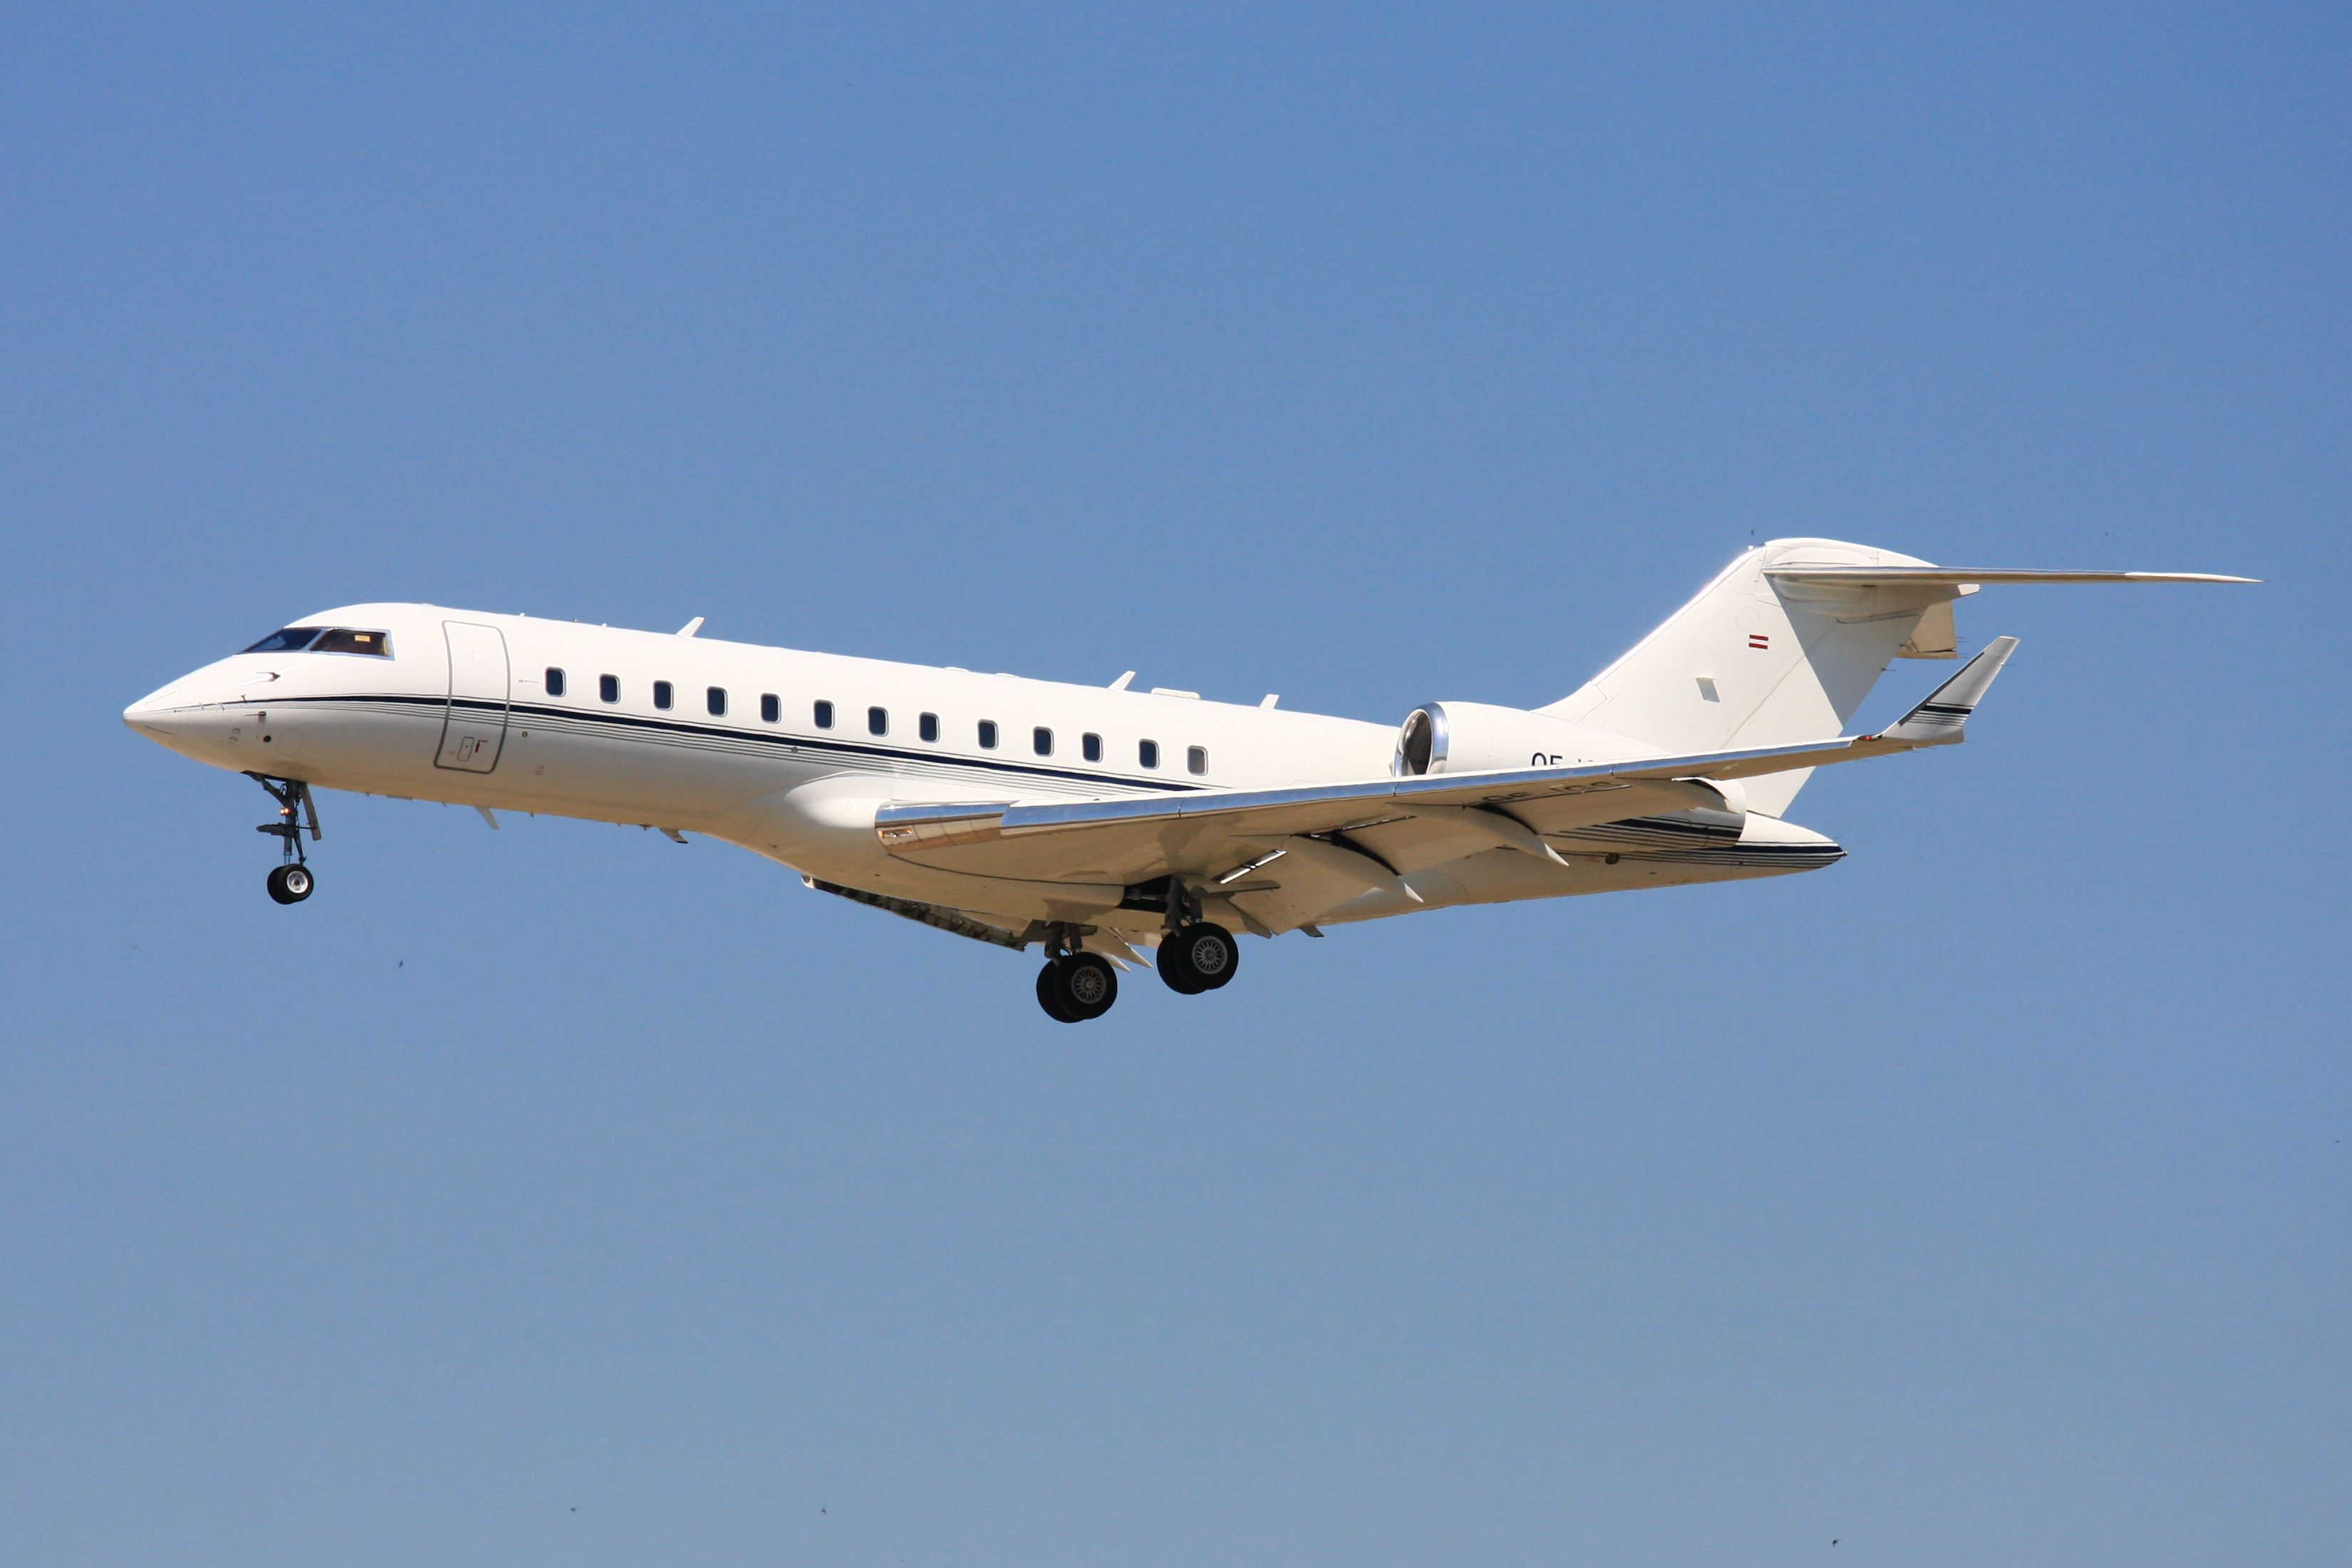 A Bombardier Global Express jet flying in the sky.